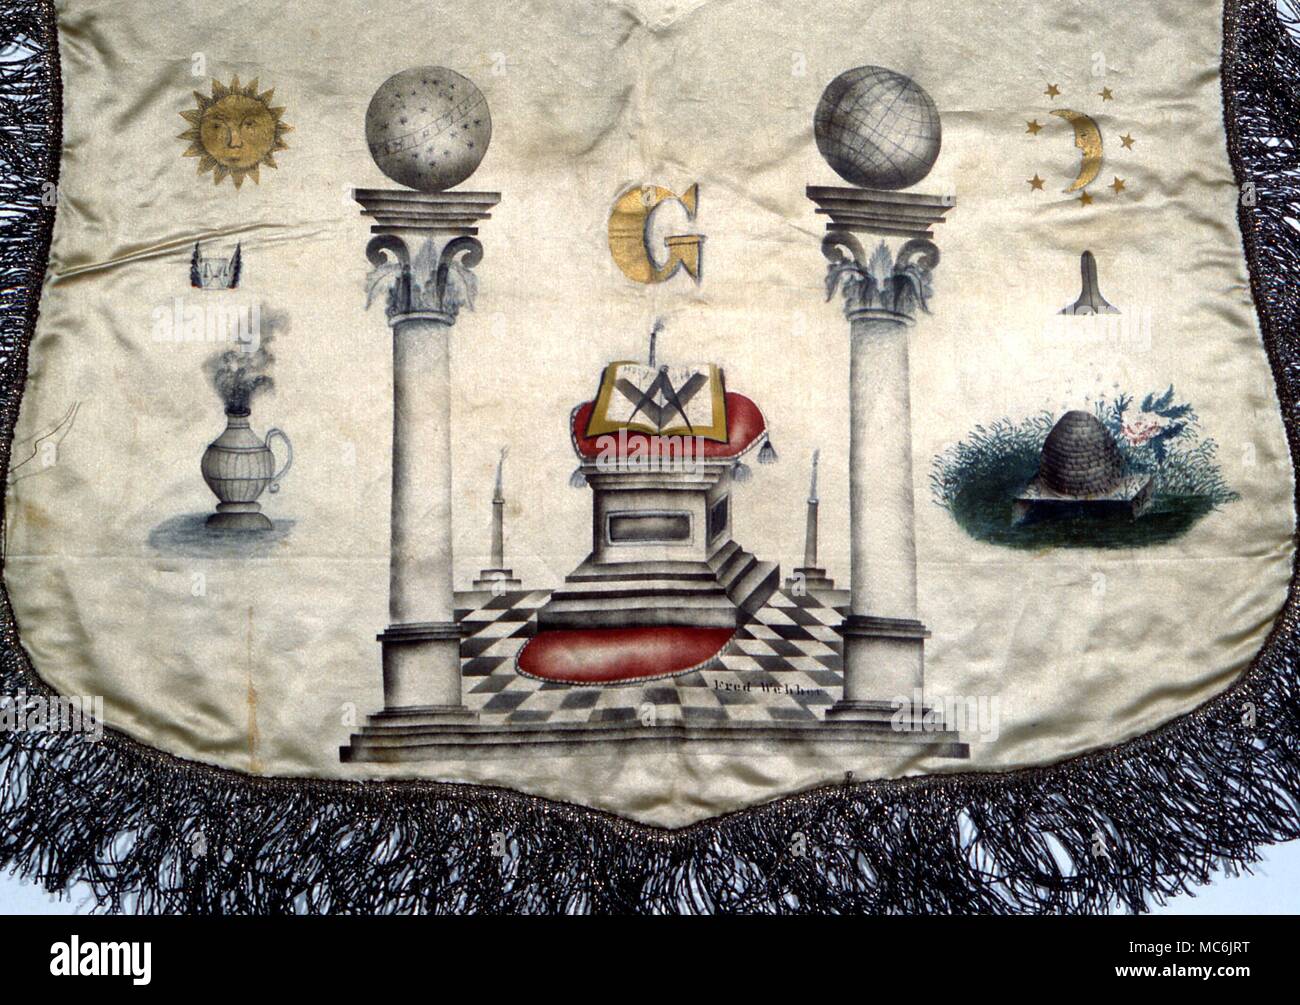 MASONIC - SYMBOLS OF TWO PILLARS. The two pillars of Jachin and Boaz, painted on a 19th century French Mason's apron (lambskin). The G stands for Geometry. In the collection of the Supreme Council (Southern Jurisdiction) Washington DC Stock Photo